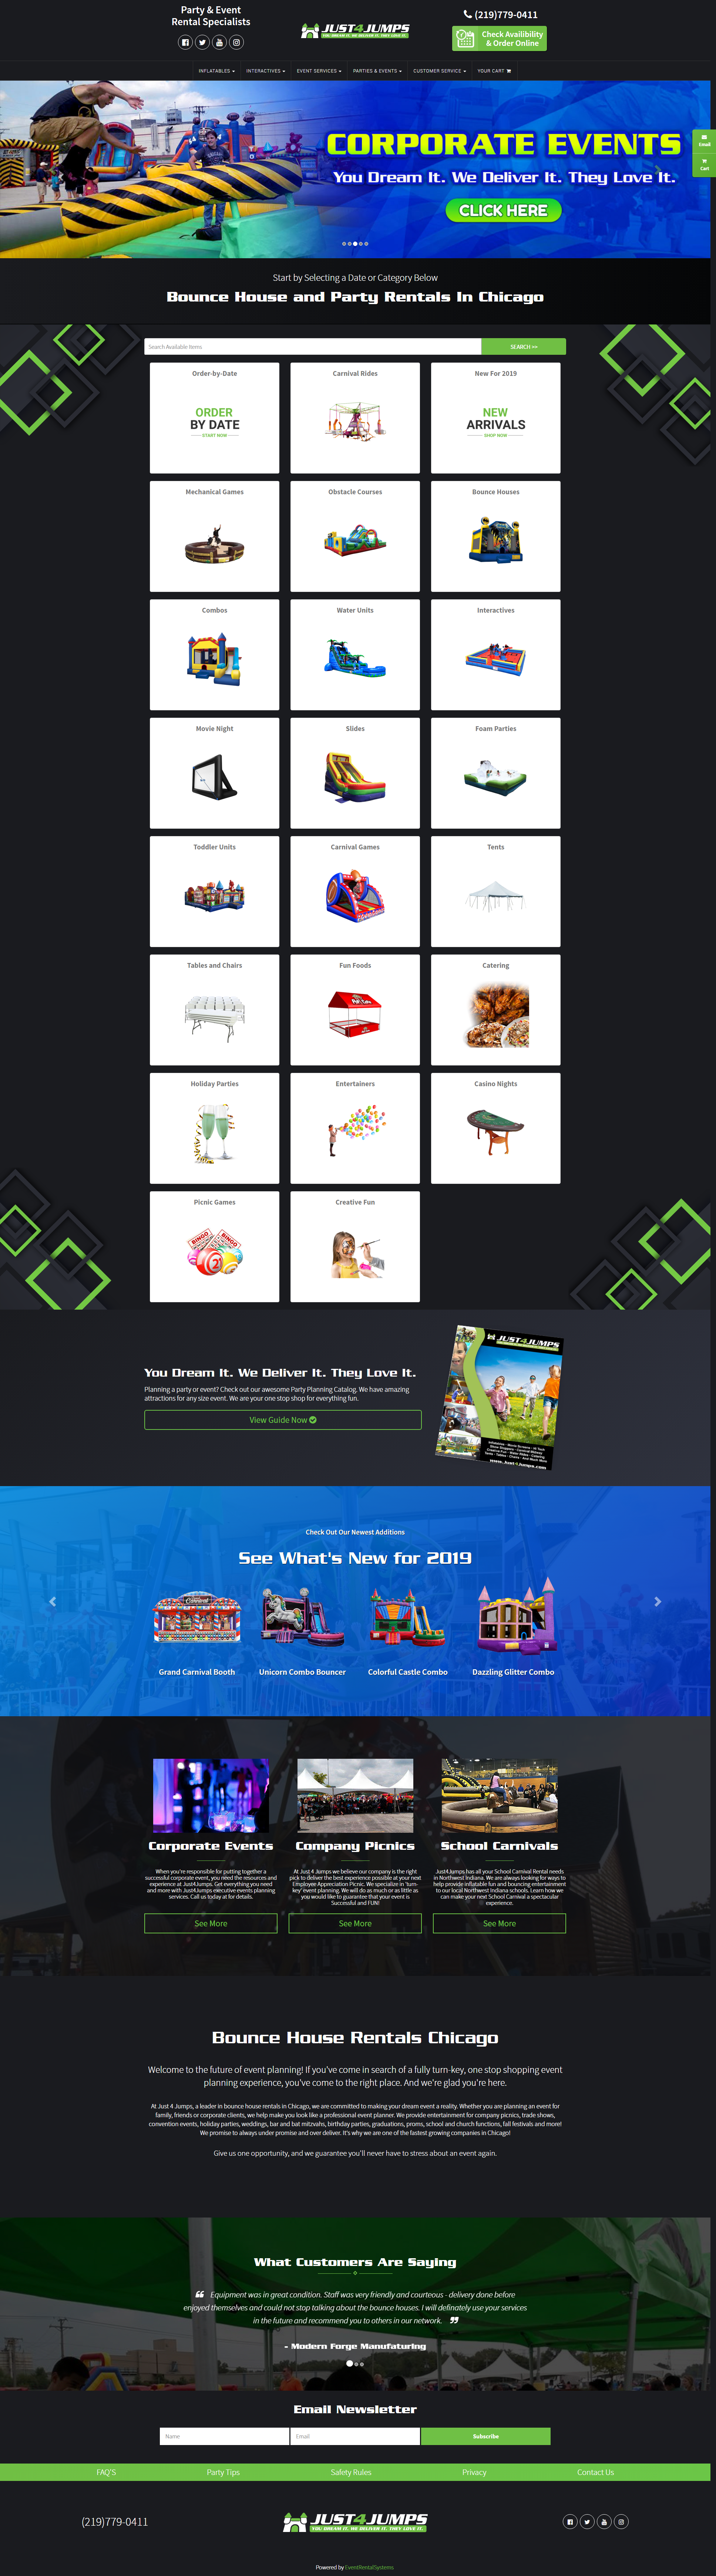 Online Game Renting and Buying Website - Design and Features Details